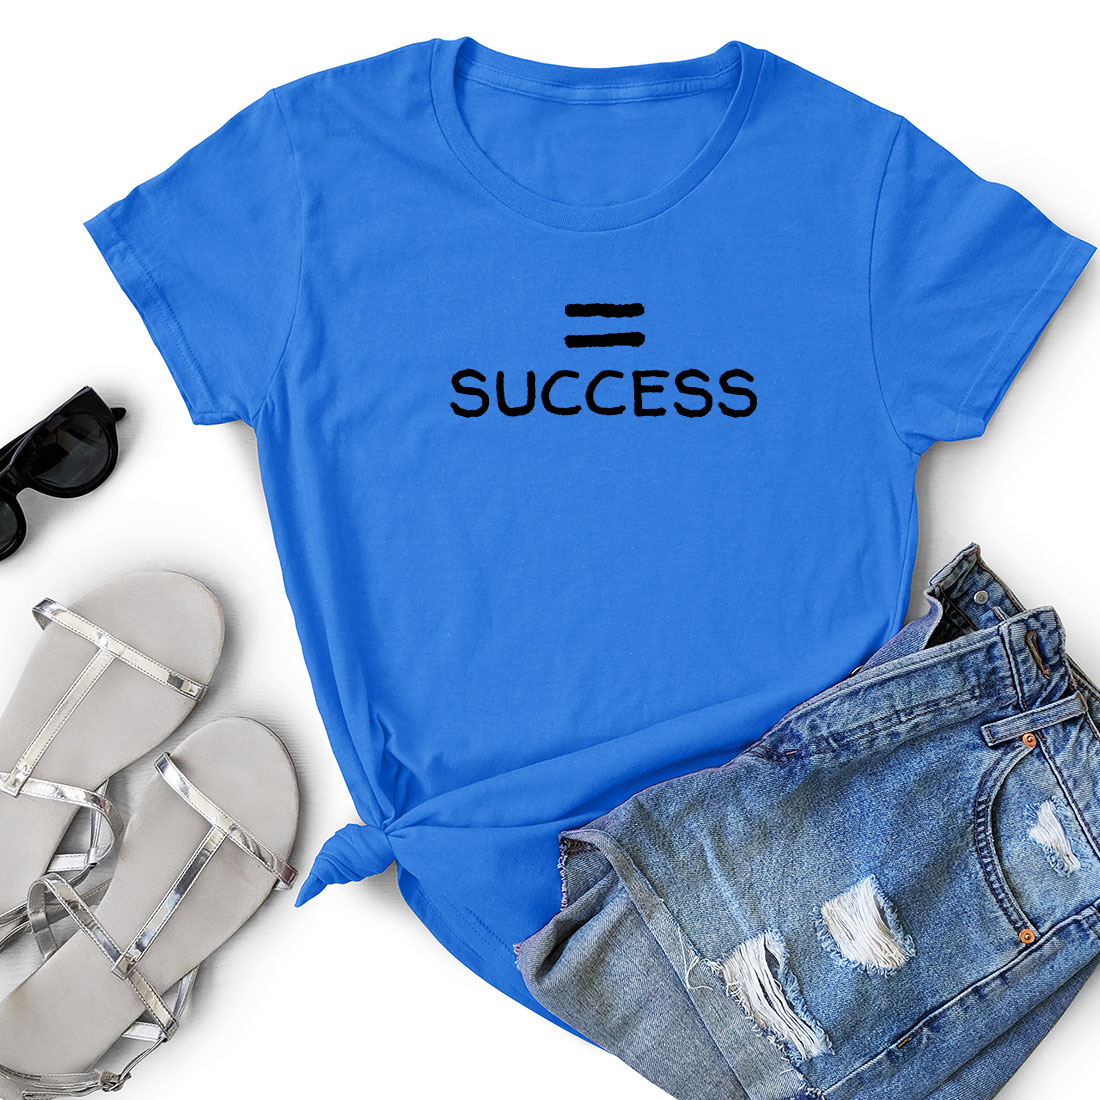 T - shirt that says success next to a pair of shorts.